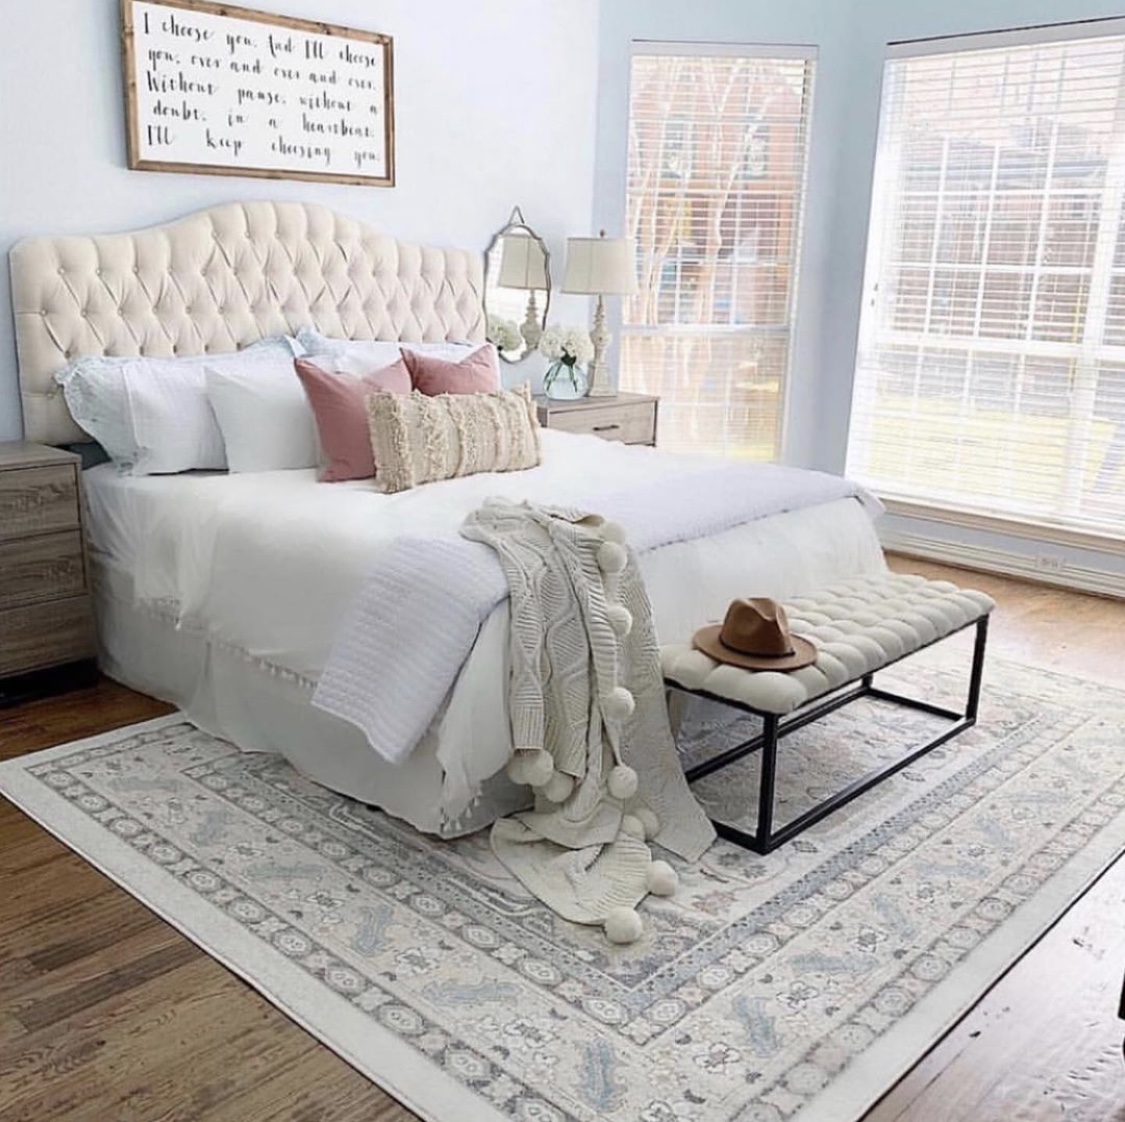 Rug Maintenance Tips: Keeping Your Bedroom Rugs Looking Fresh And Vibrant